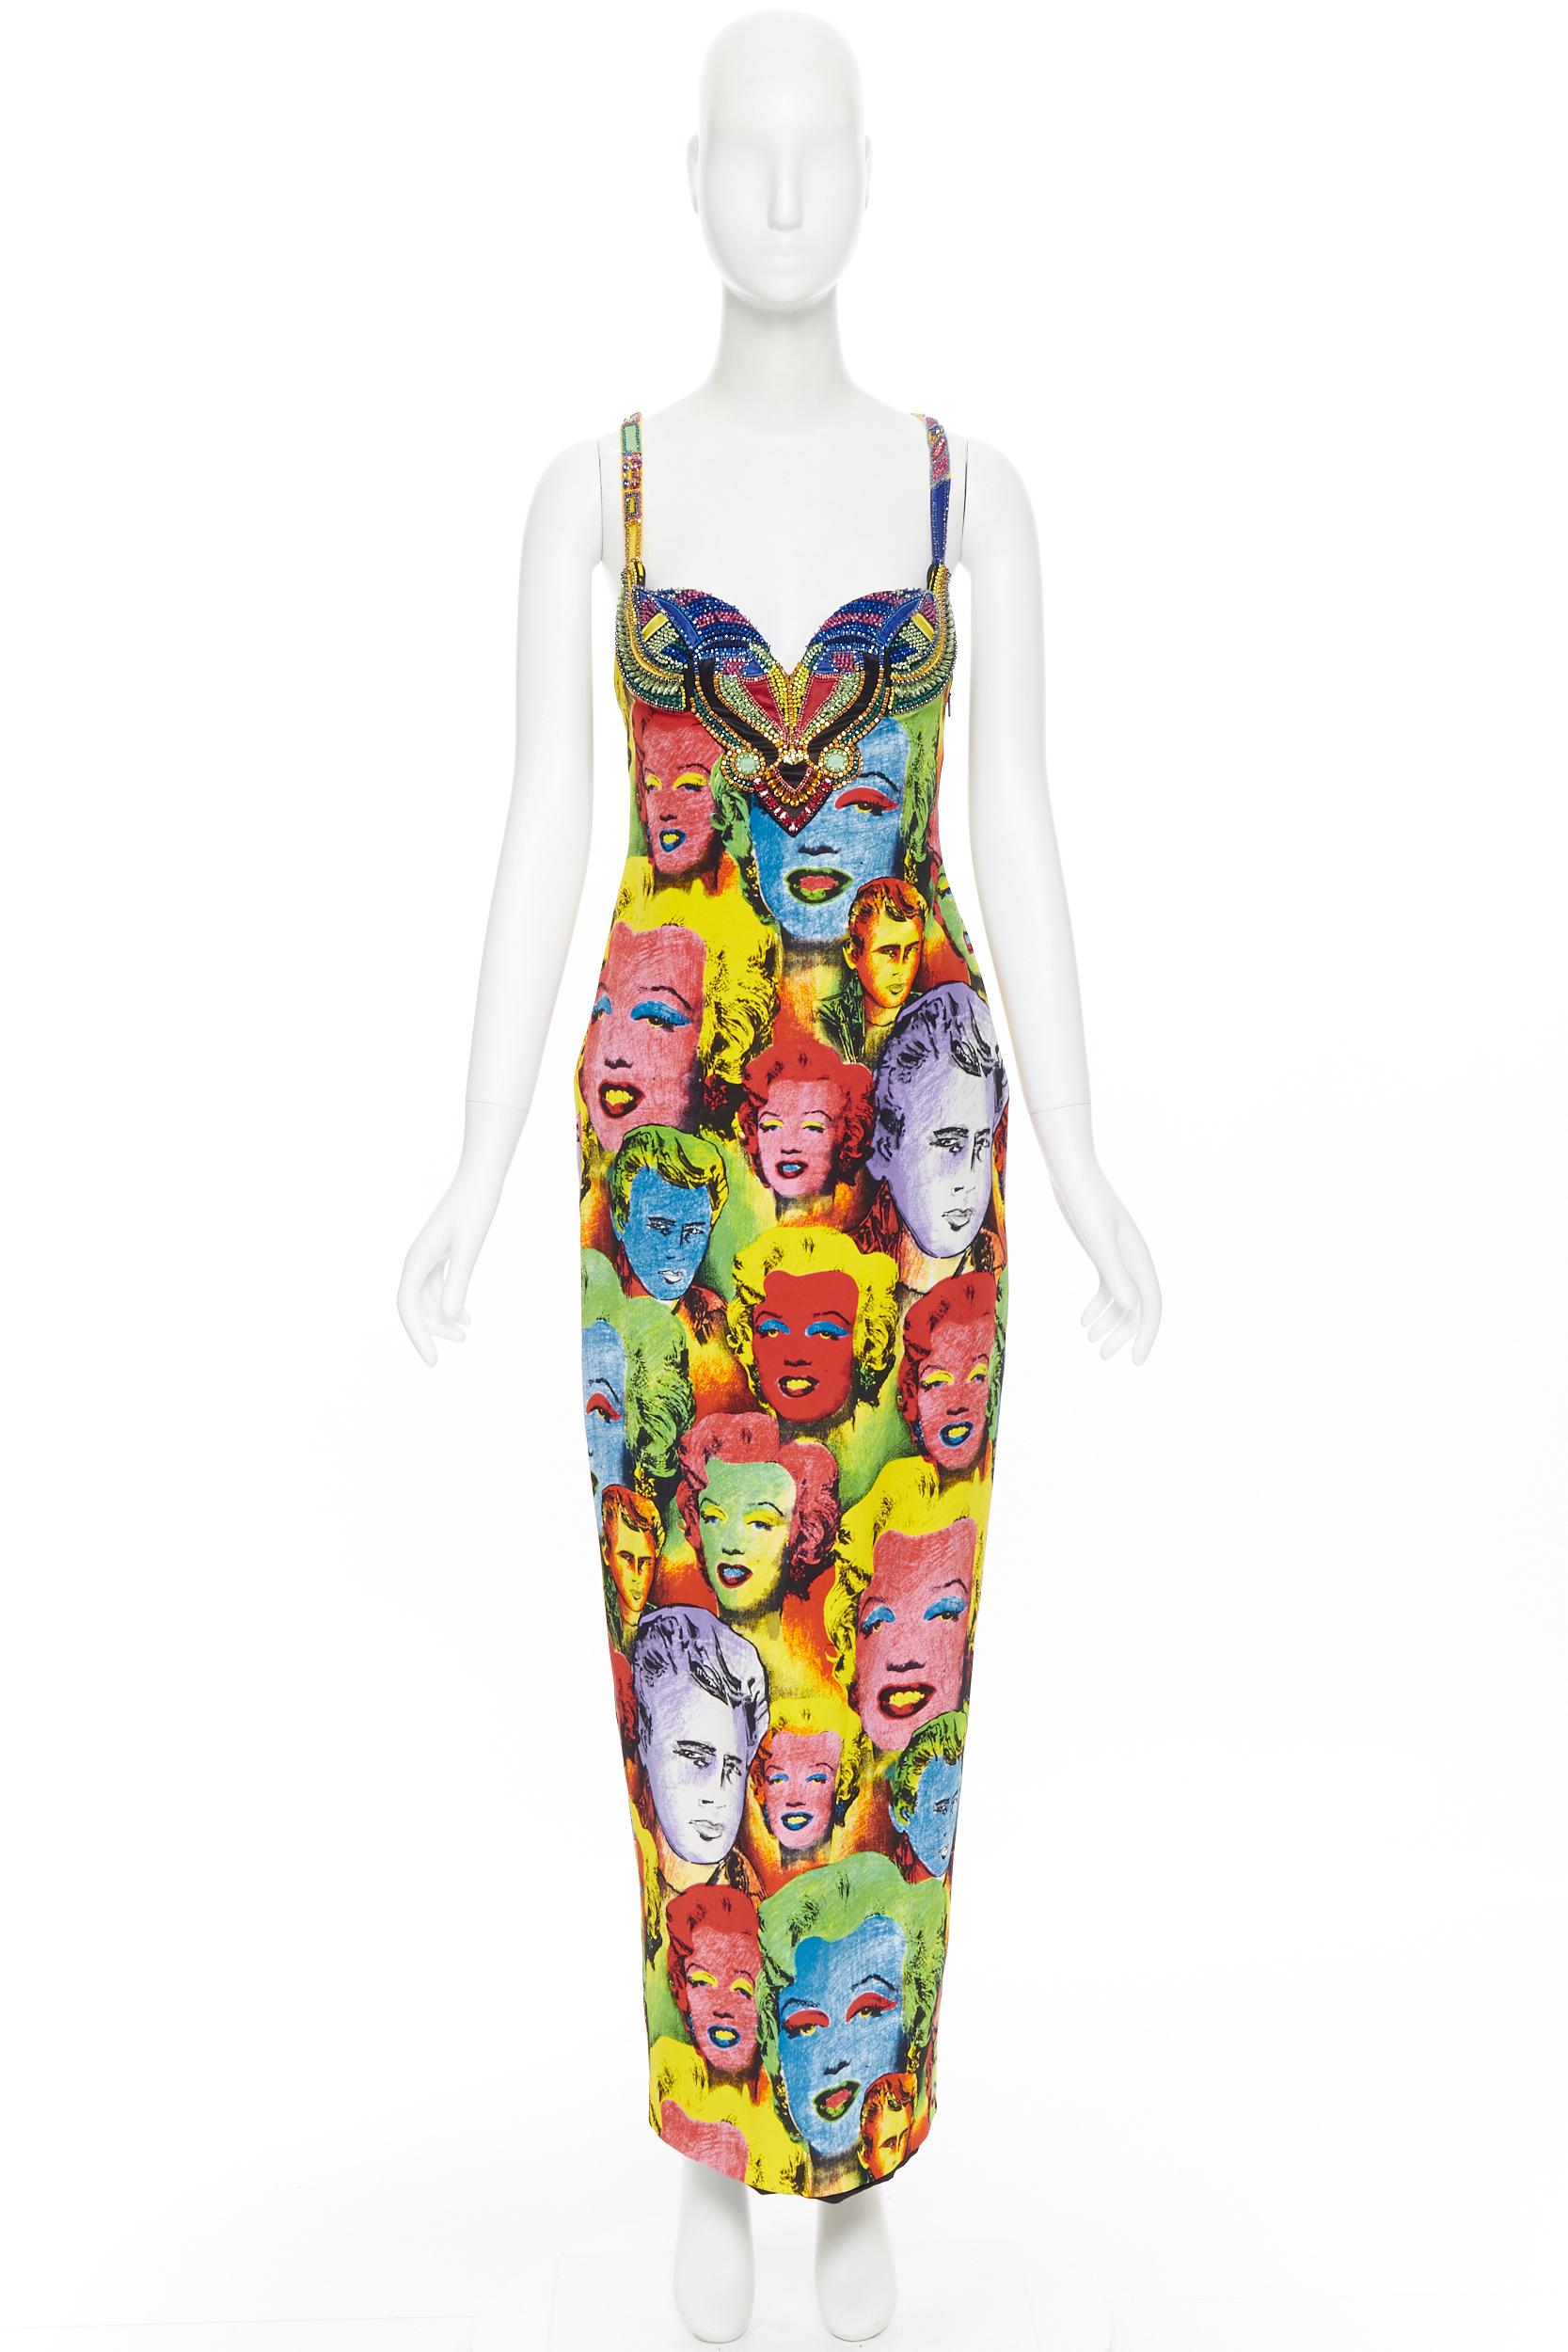 rare VERSACE SS18 Tribute Runway Warhol Pop Art SS1991 crystal Monroe dress IT38
Brand: Versace
Designer: Donatella Versace
Collection: SS18
Model Name / Style: Monroe gown
Material: Silk
Color: Multicolour
Pattern: Abstract
Closure: Zip
Extra